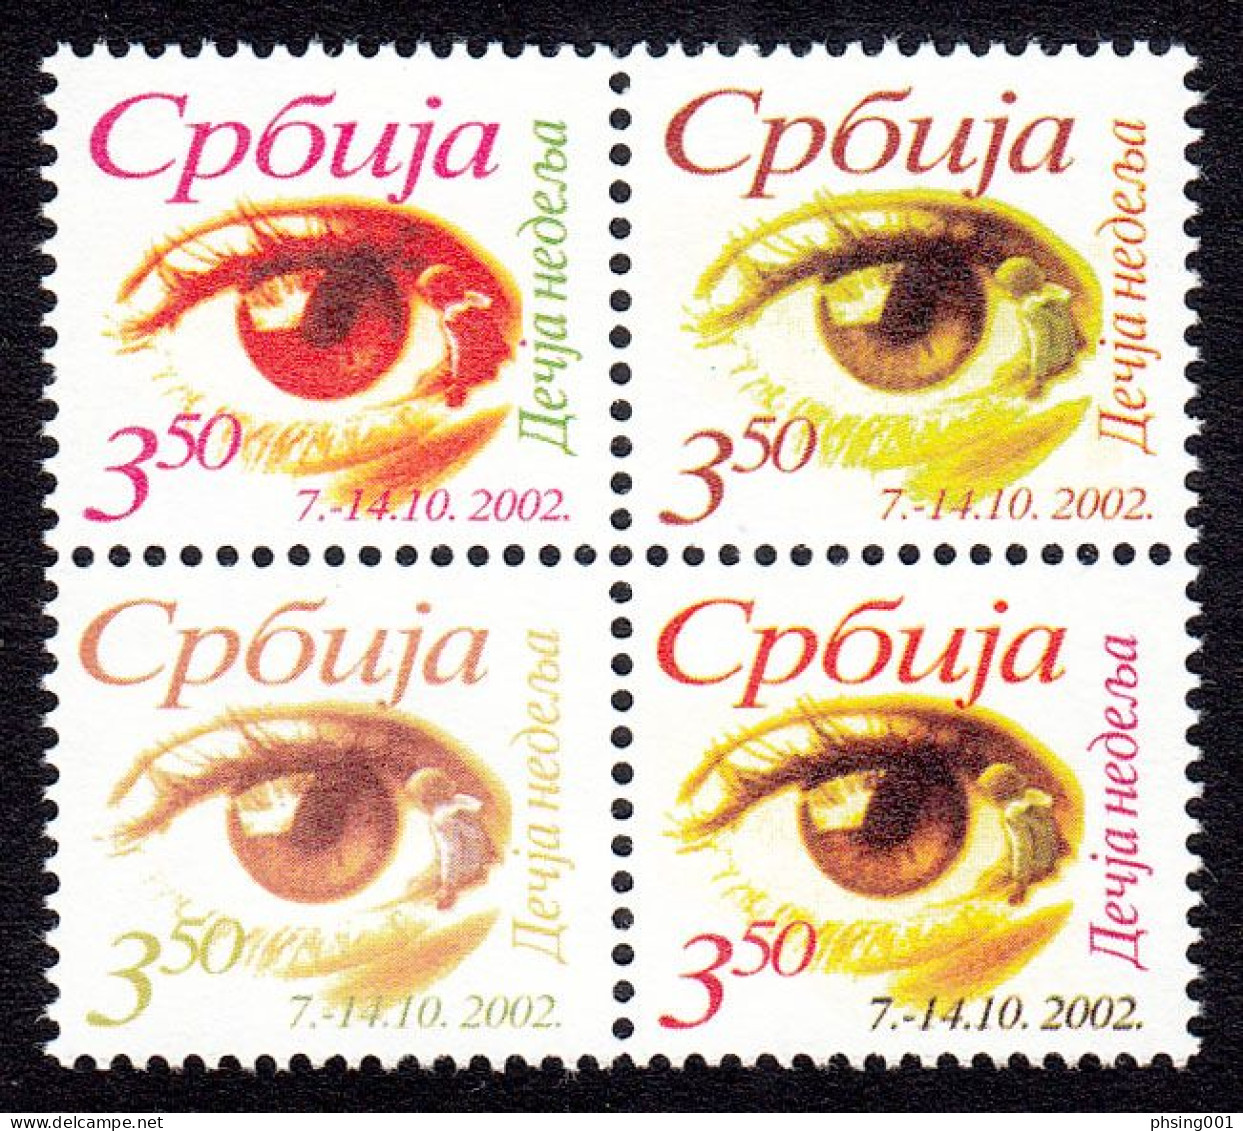 Yugoslavia Serbia 2002 Children's Week Eyes Tax Charity Surcharge, 25, 26, 35 And 36 Position In Sheet In Block Of 4 MNH - Ongebruikt